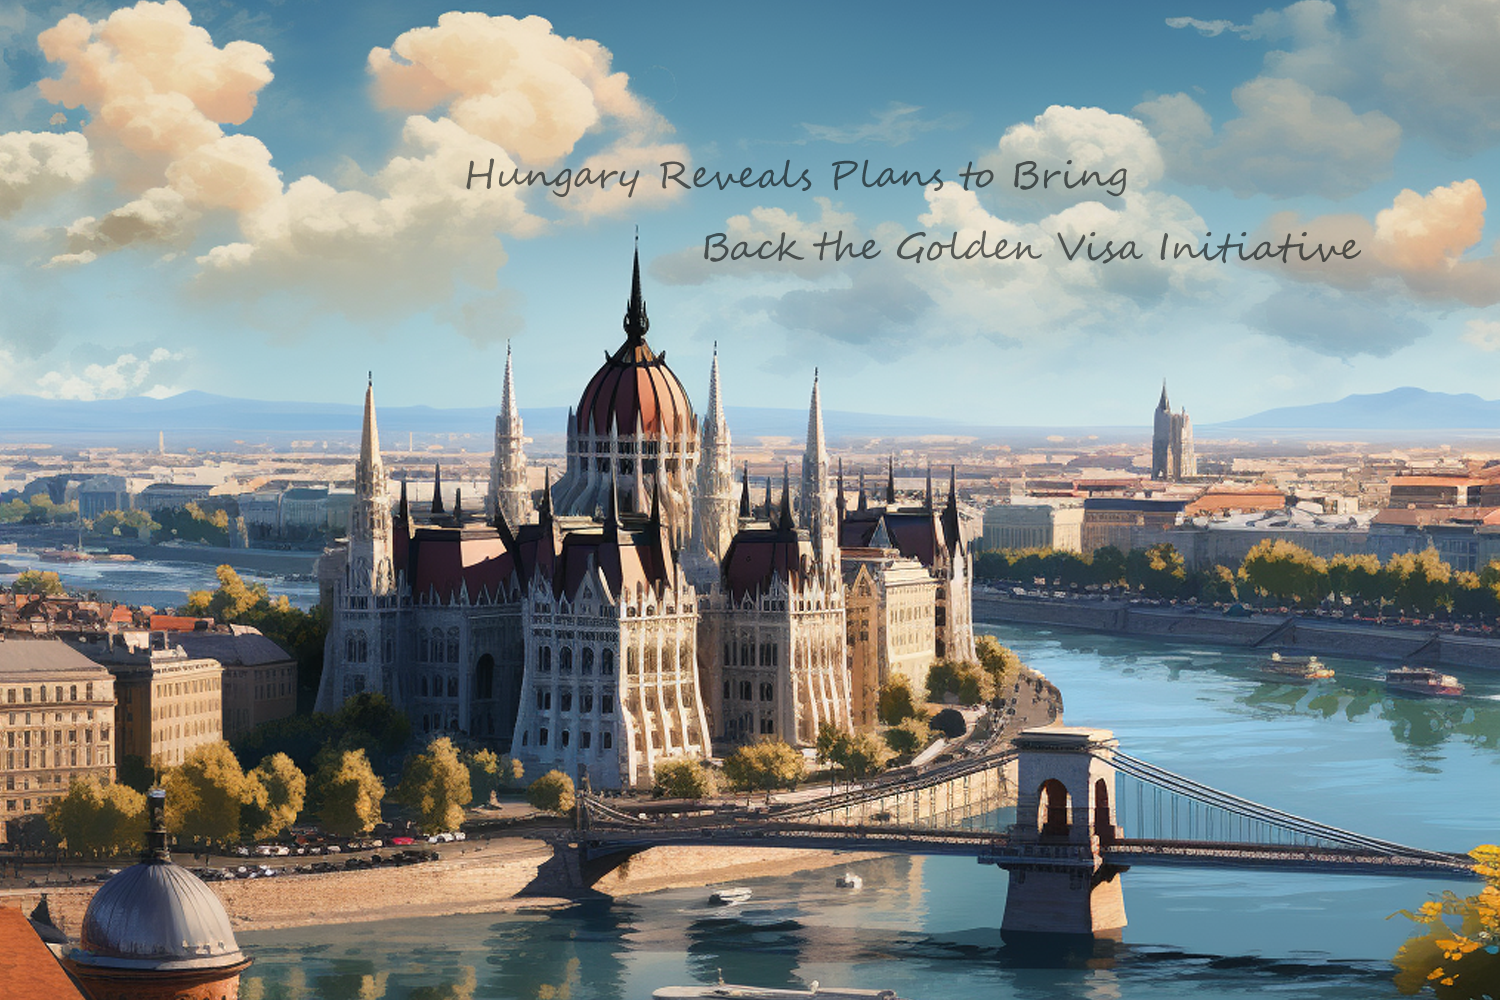 Hungary Reveals Plans to Bring Back the Golden Visa Initiative.